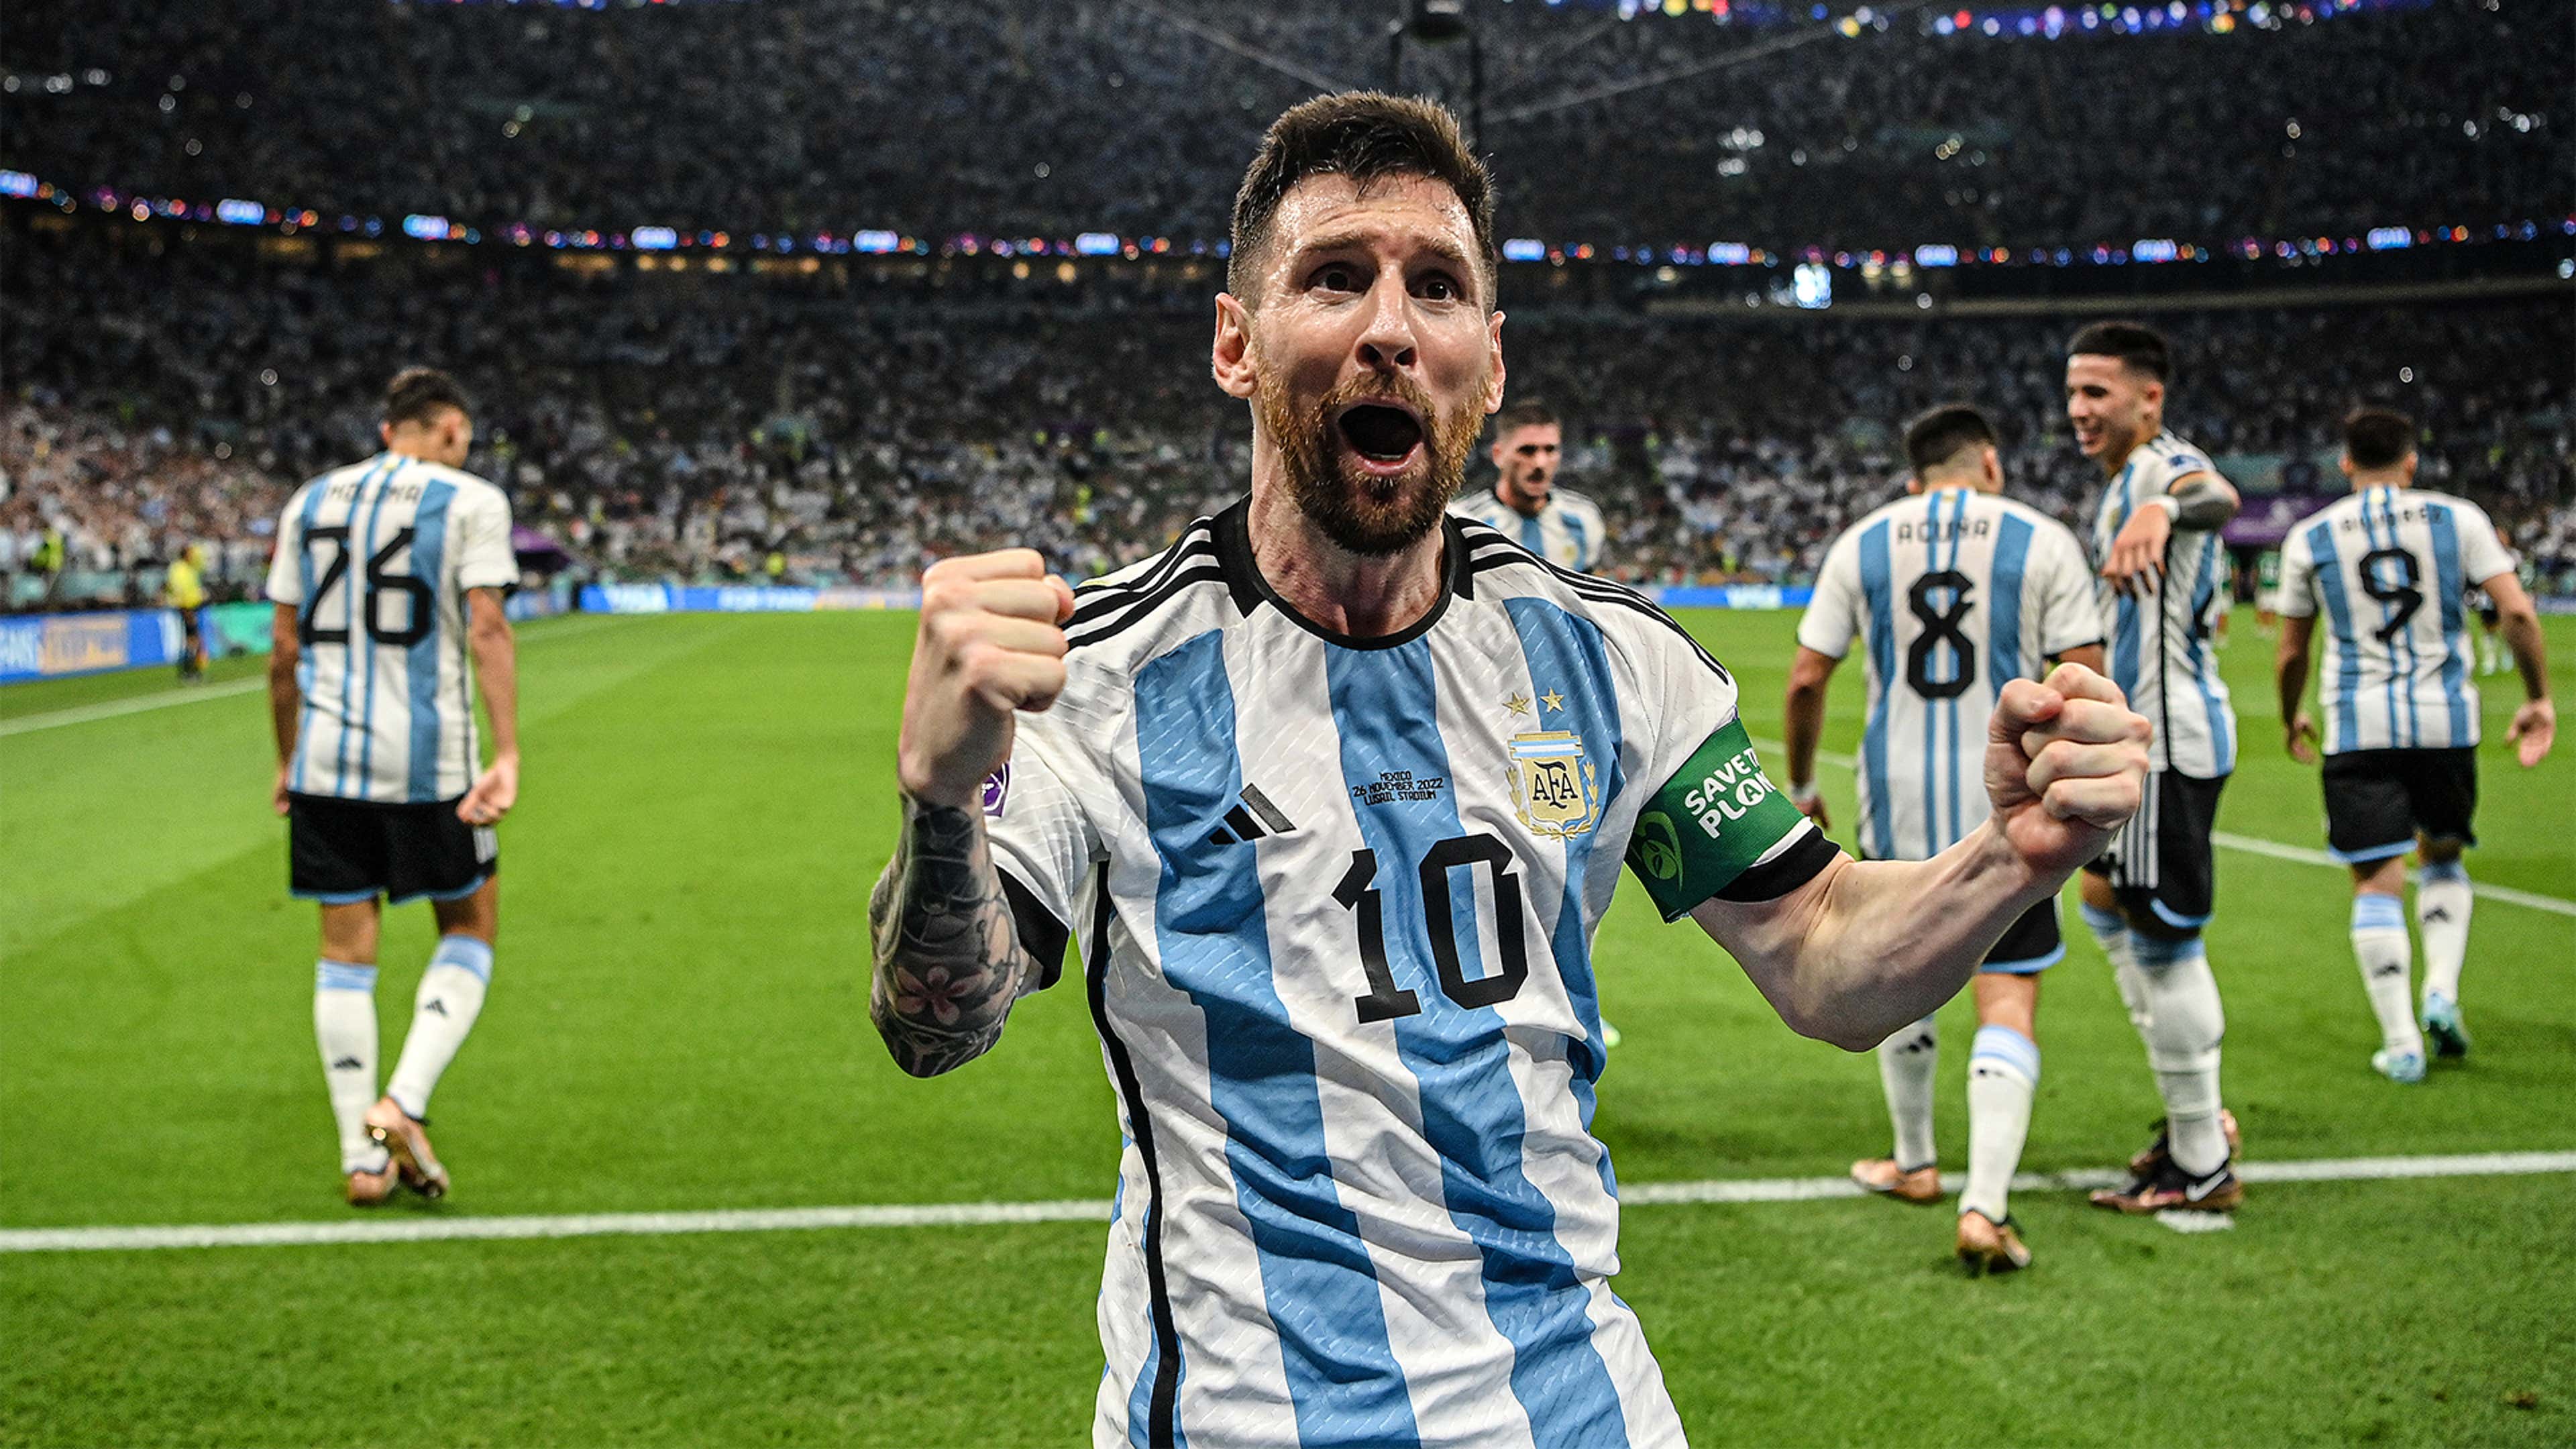 Lionel Messi helps keep Argentina's World Cup hopes alive with